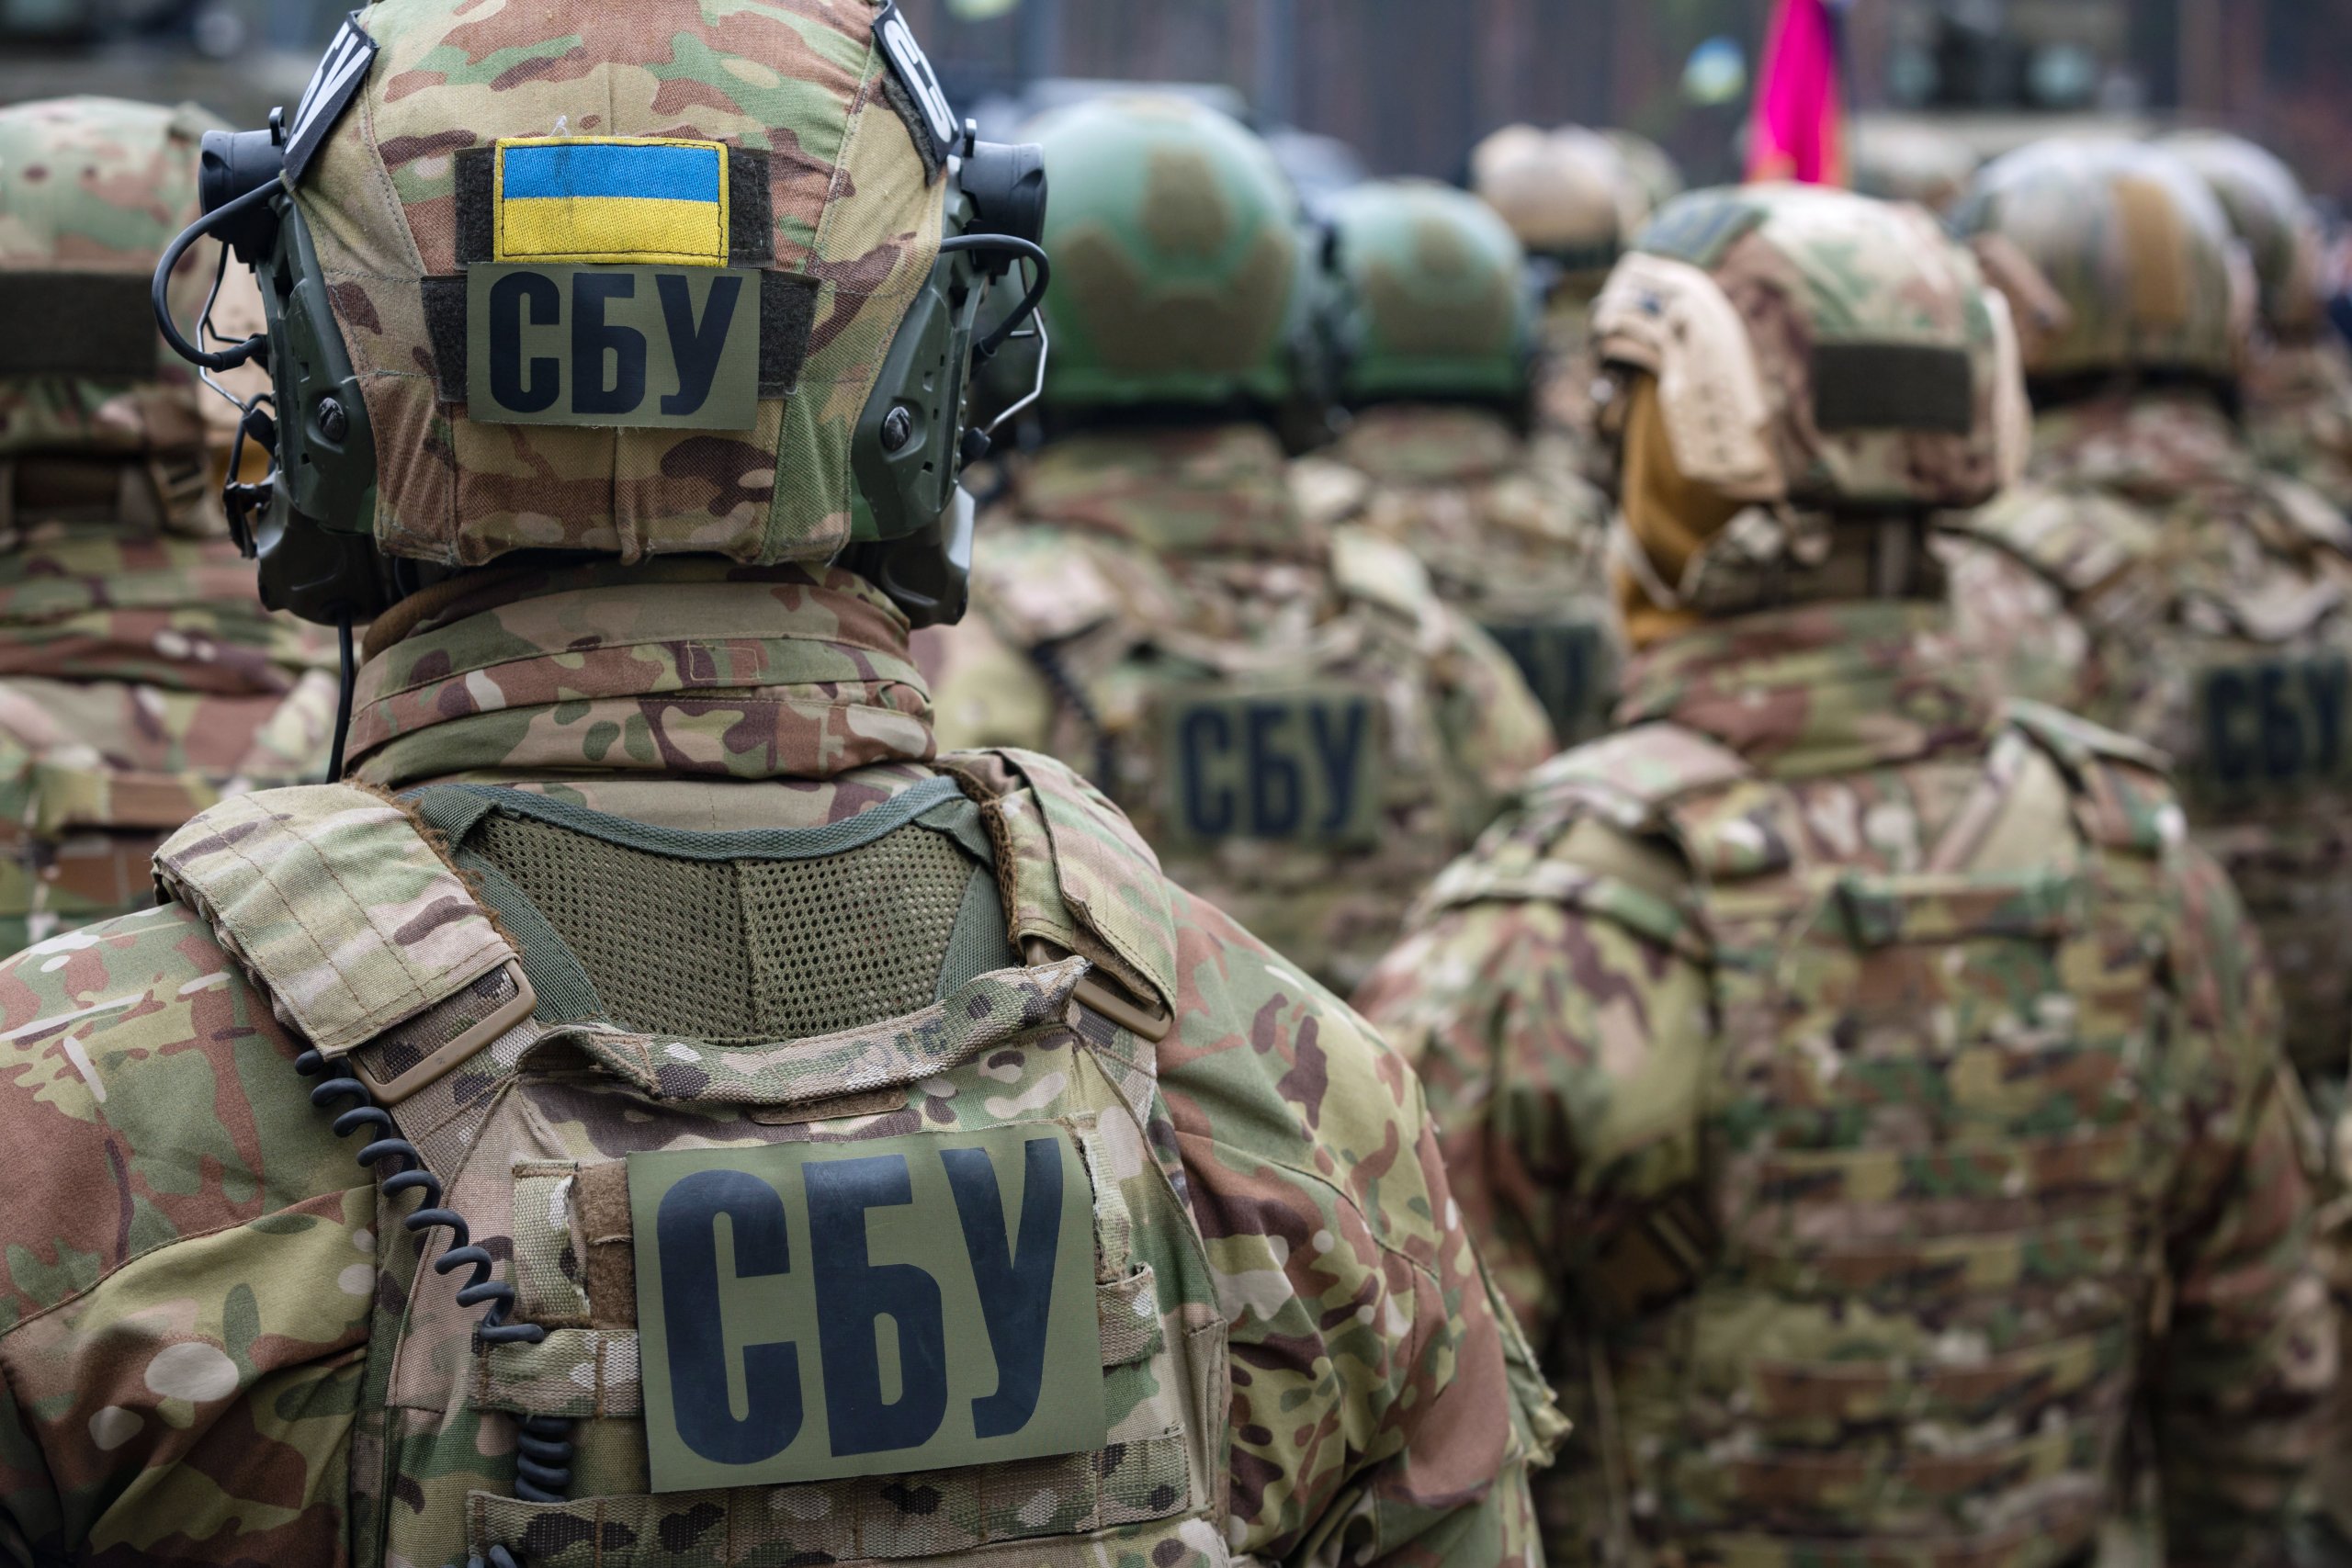 SSU thwarts FSB agent group planning mass aerial attacks on Ukraine ahead of Easter